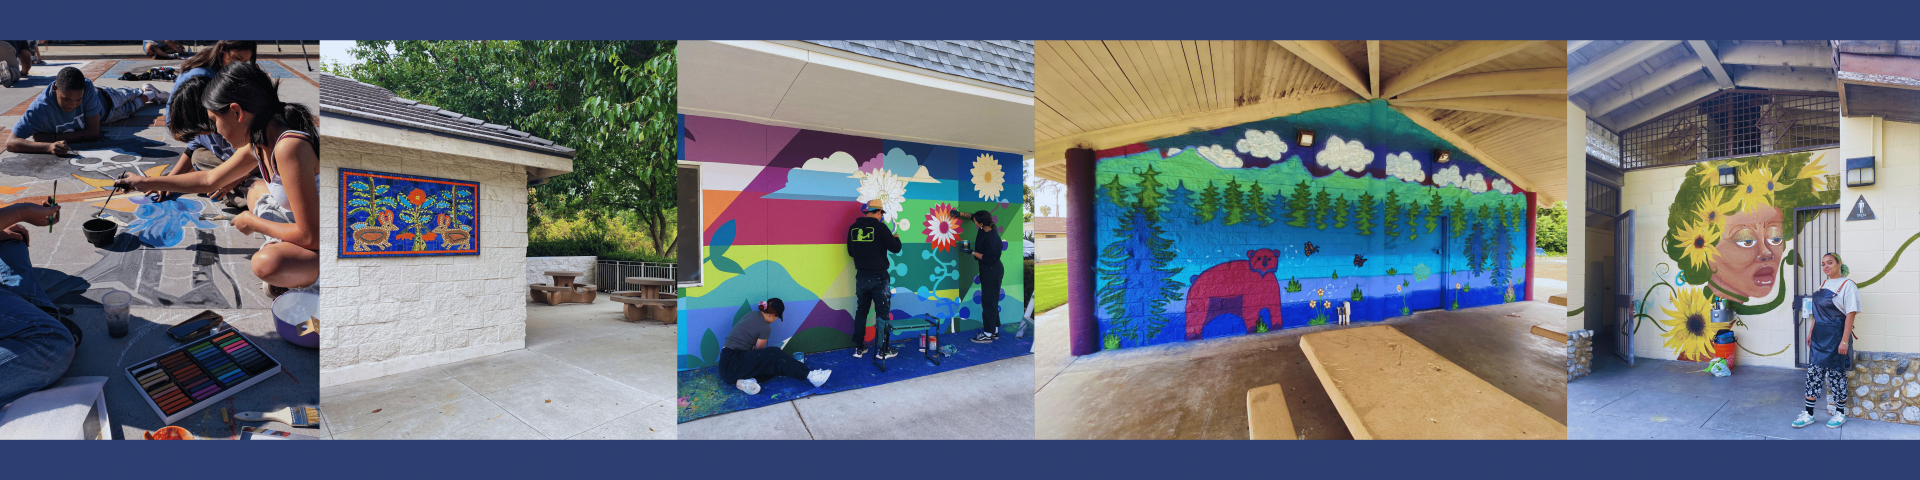 4 images of Pomona art. From left to right we see kids painting the ground, color blue mosaic art hanging on a building, adults painting a large mural, and then a big color mural of a bear in the woods